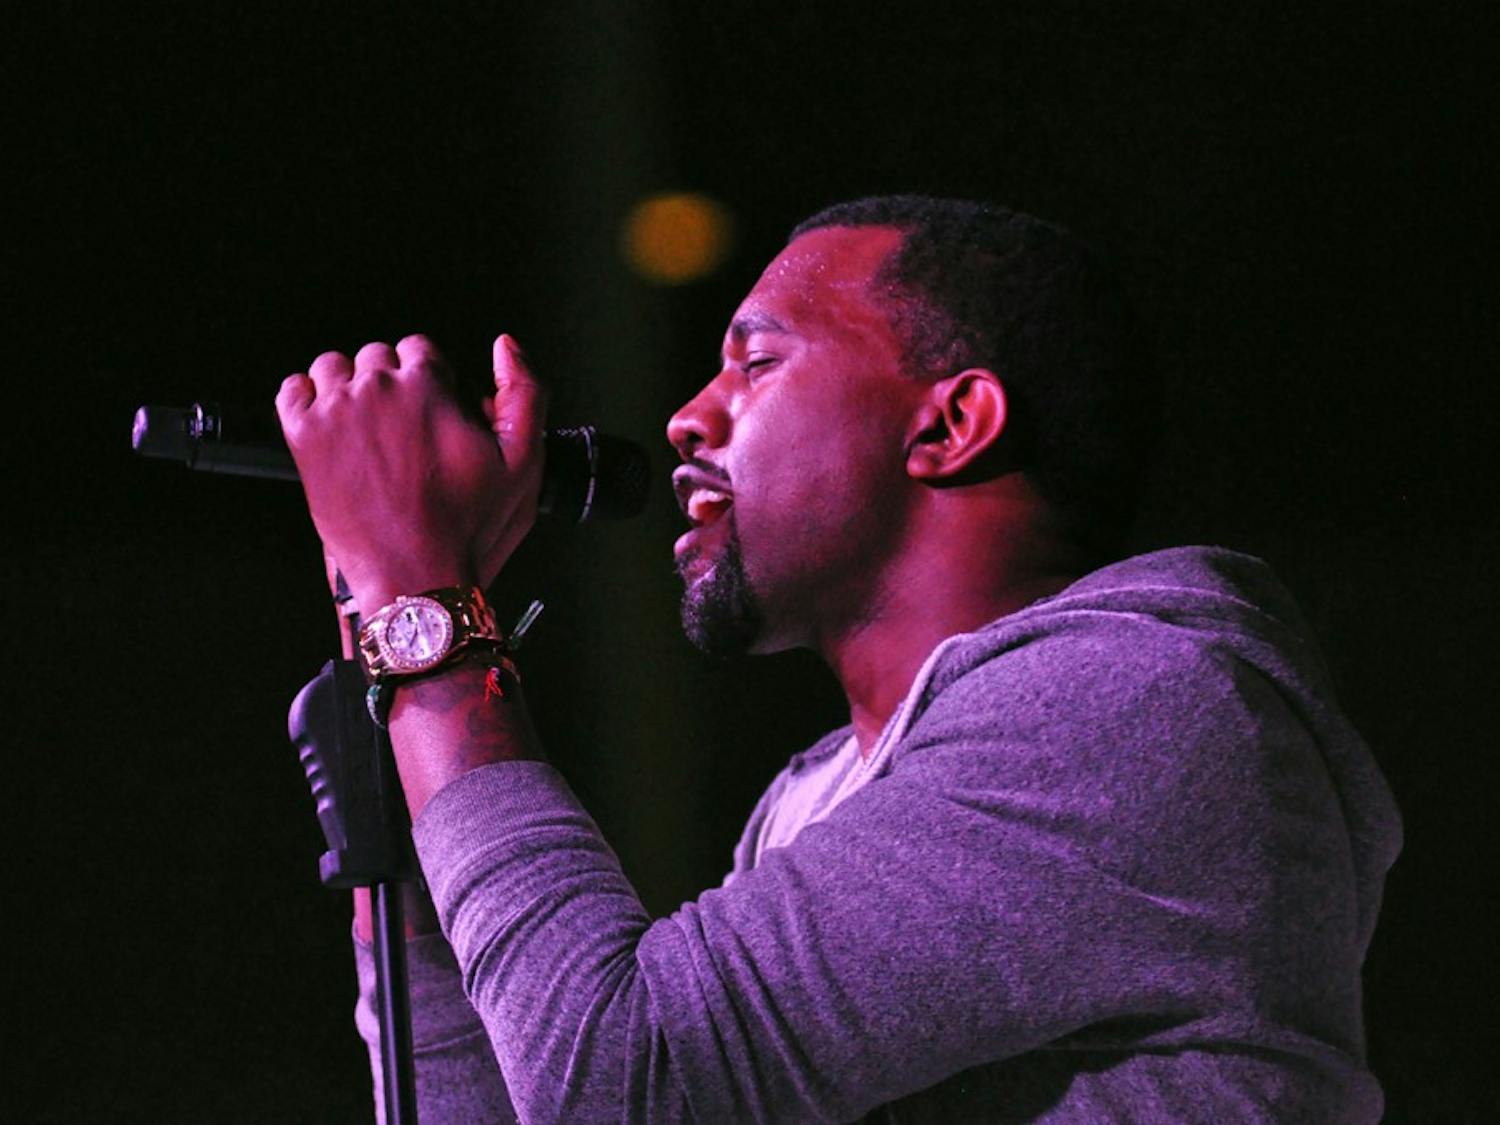 Kanye West performs at The Museum of Modern Art’s annual Party in the Garden benefit in May 2011.
